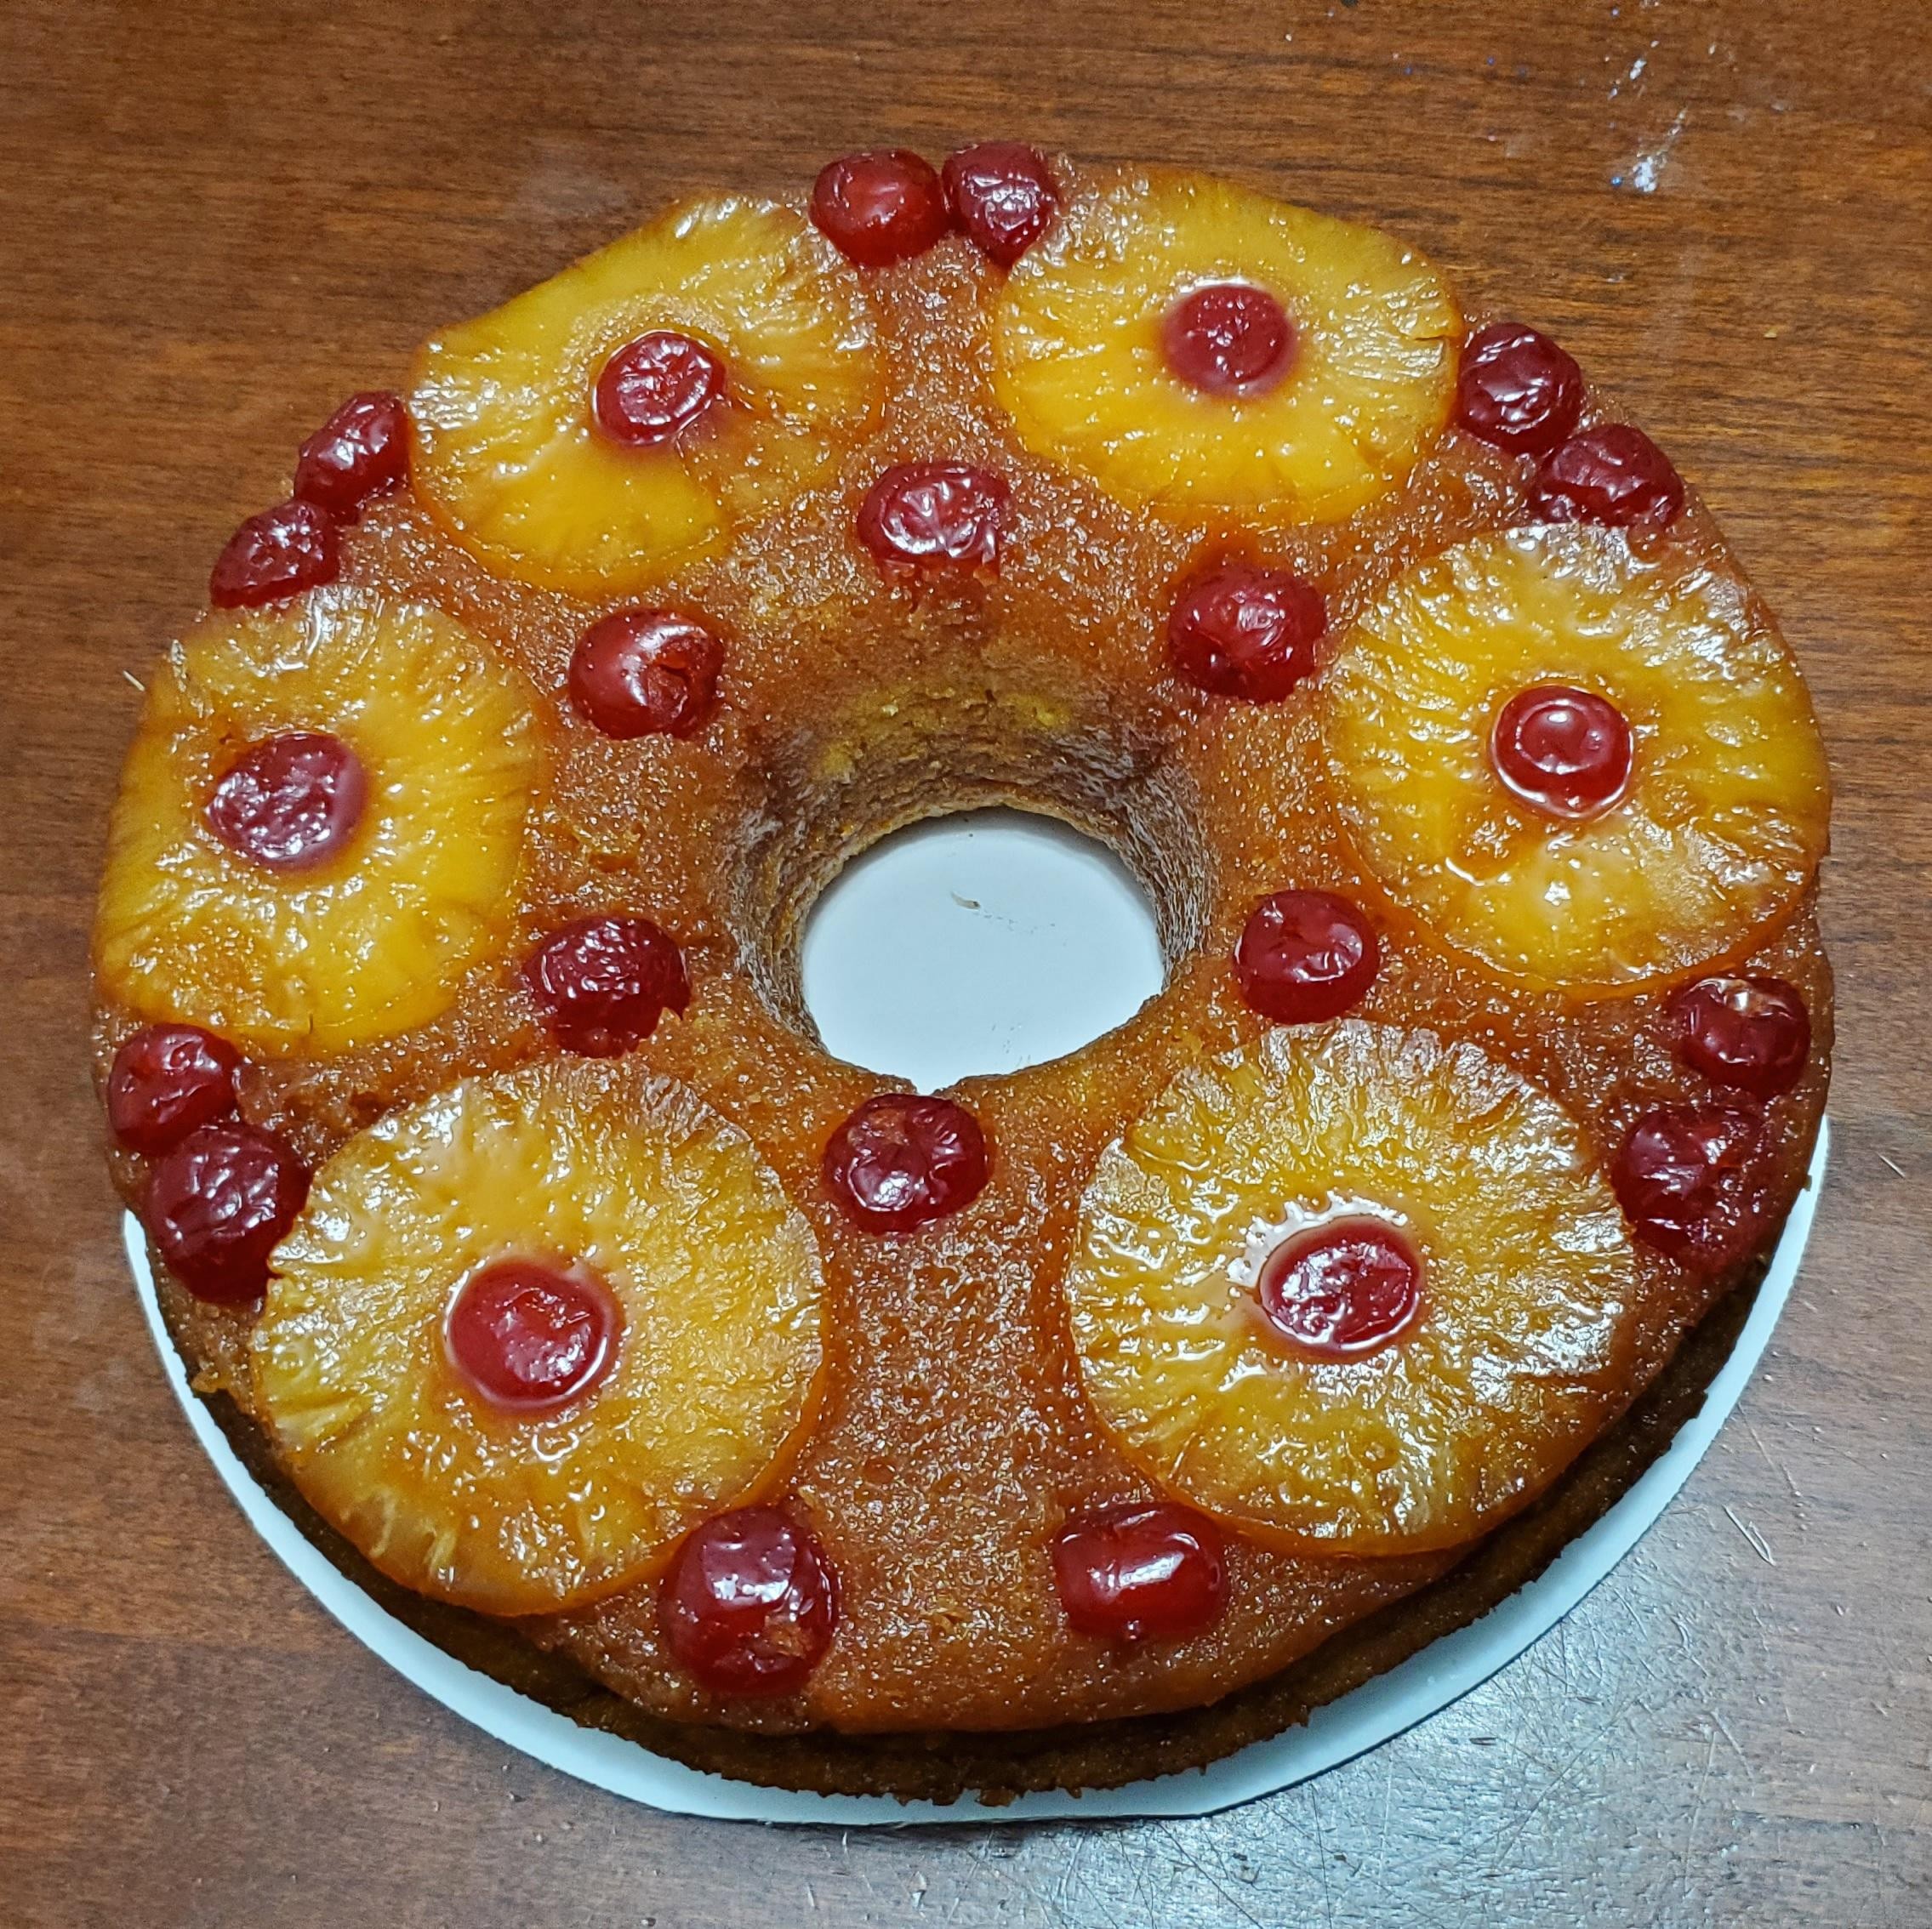 Spiked Pineapple Upside down Cake